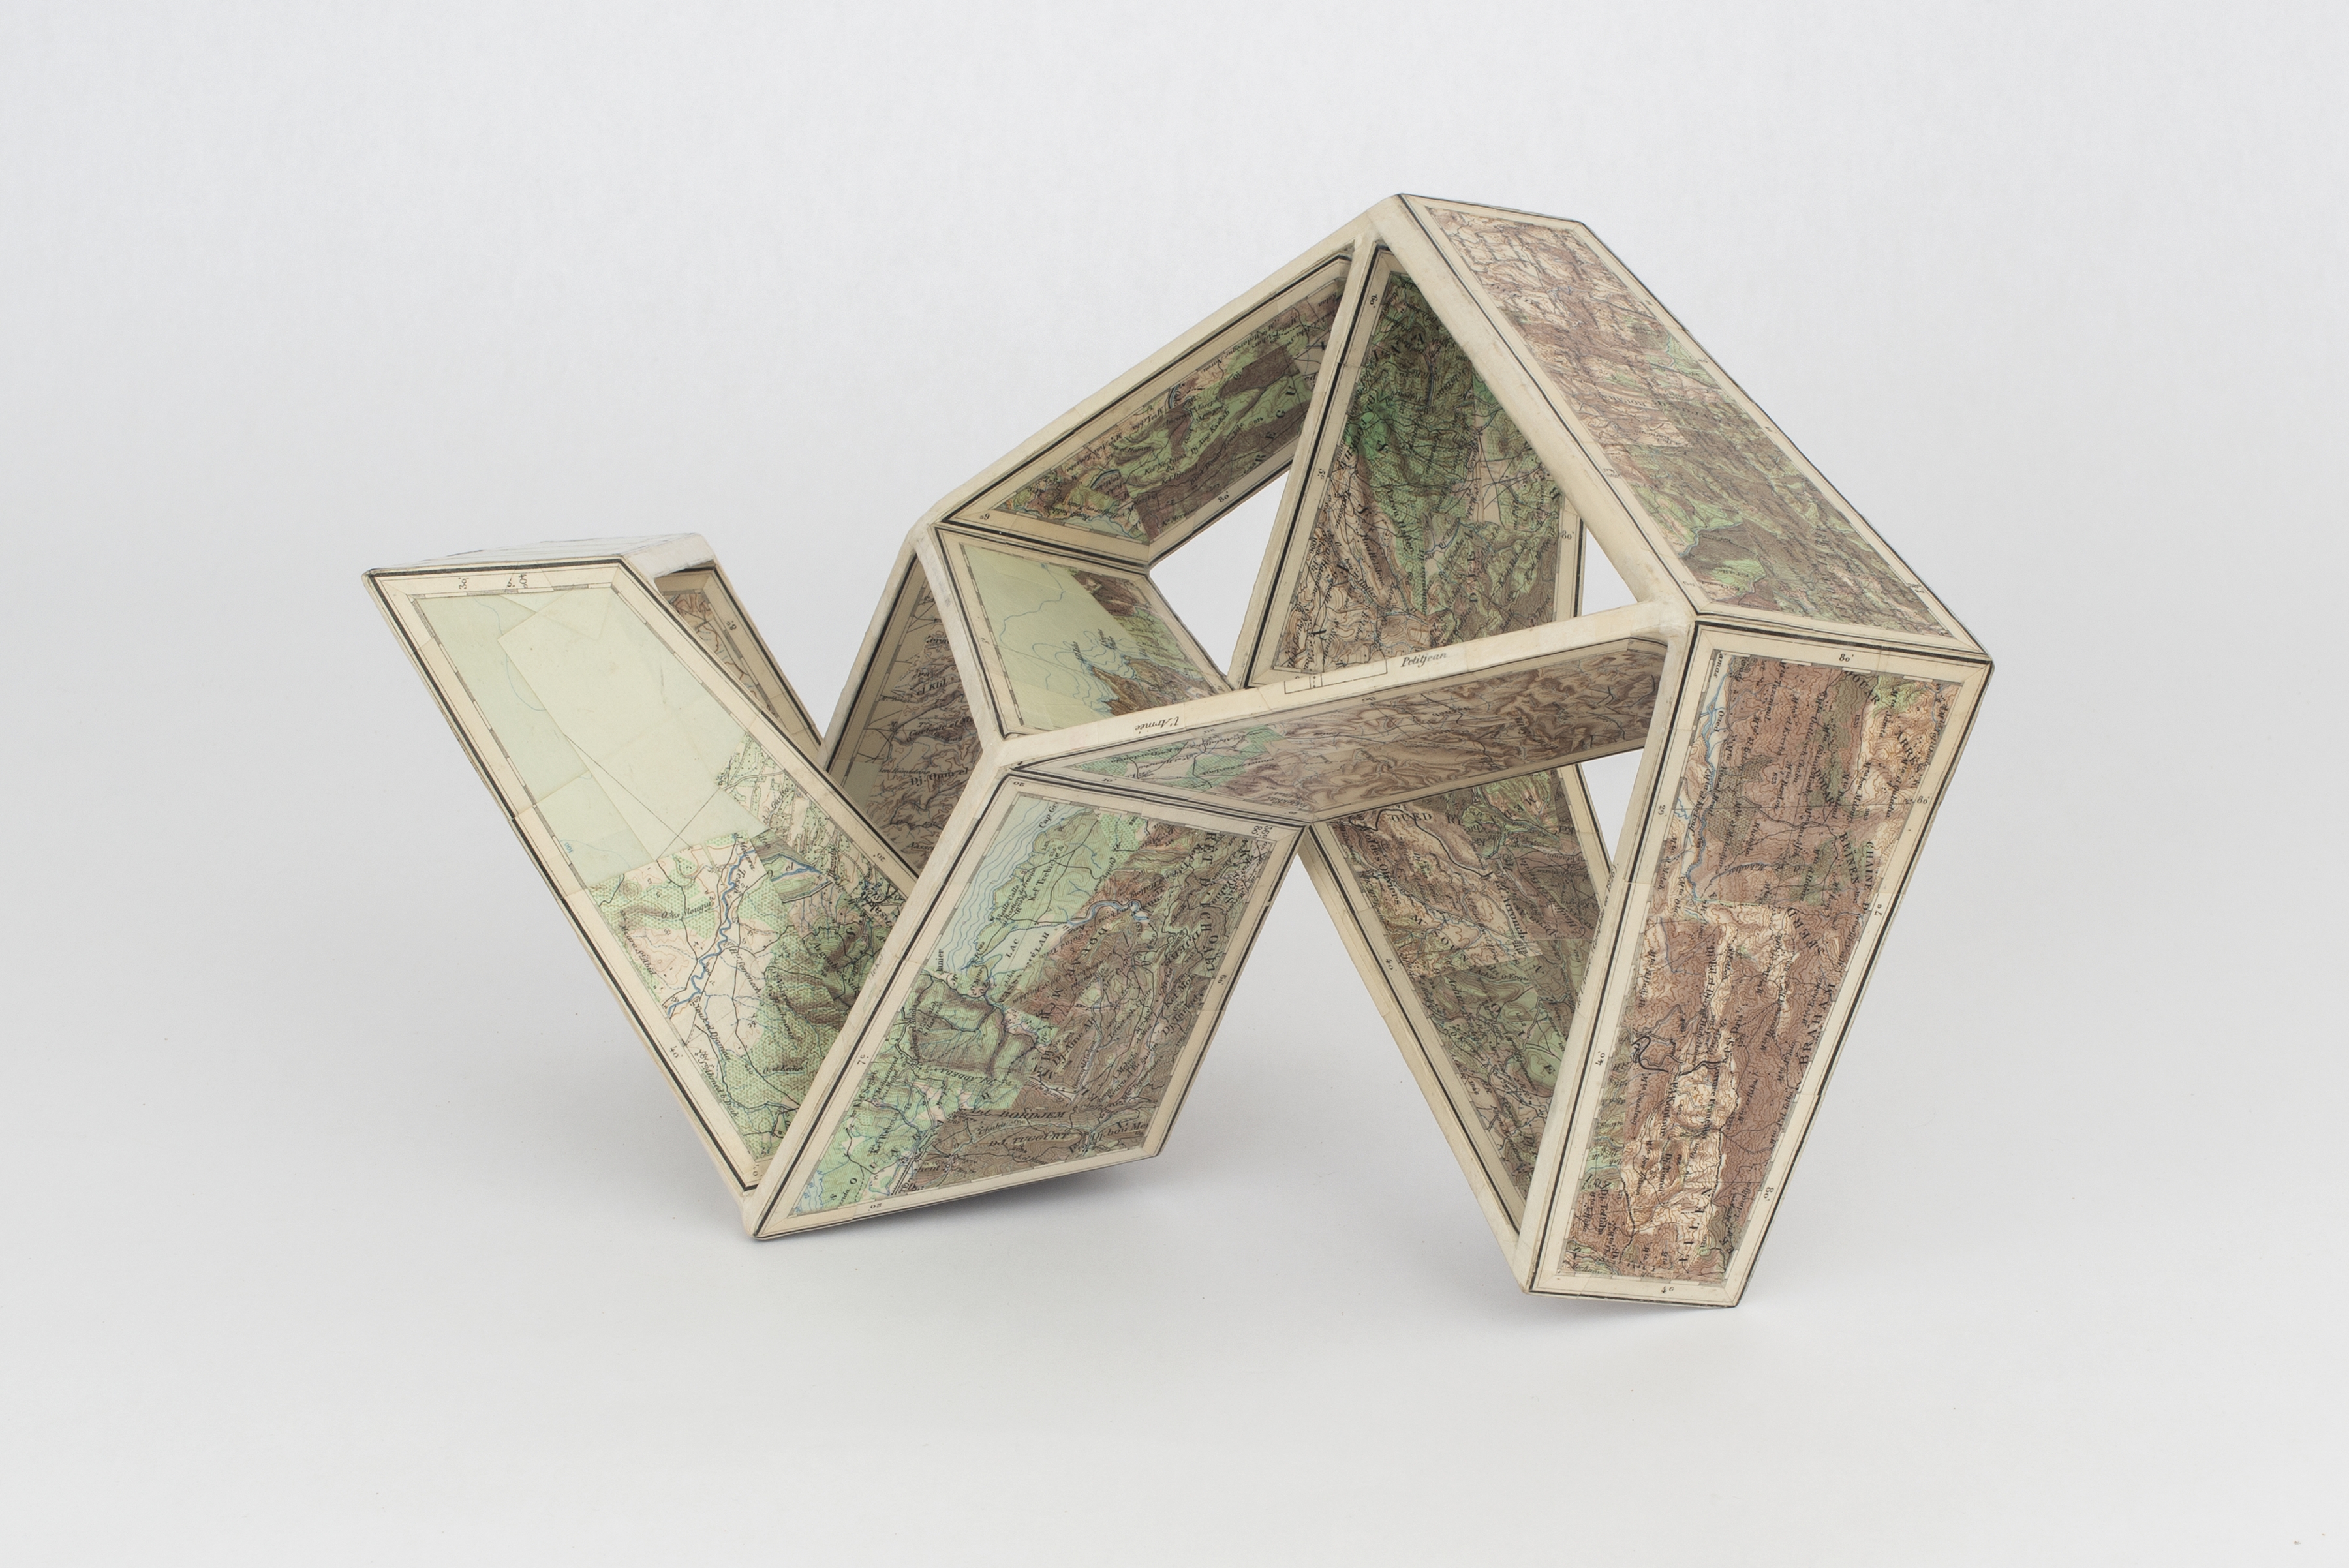 Doubled Landscape (Variable Globes), 2021

Plywood and reconstituted map fragments

25 x 40 x 25 cm / 9.8 x 15.7 x 9.8 in.

Enquire